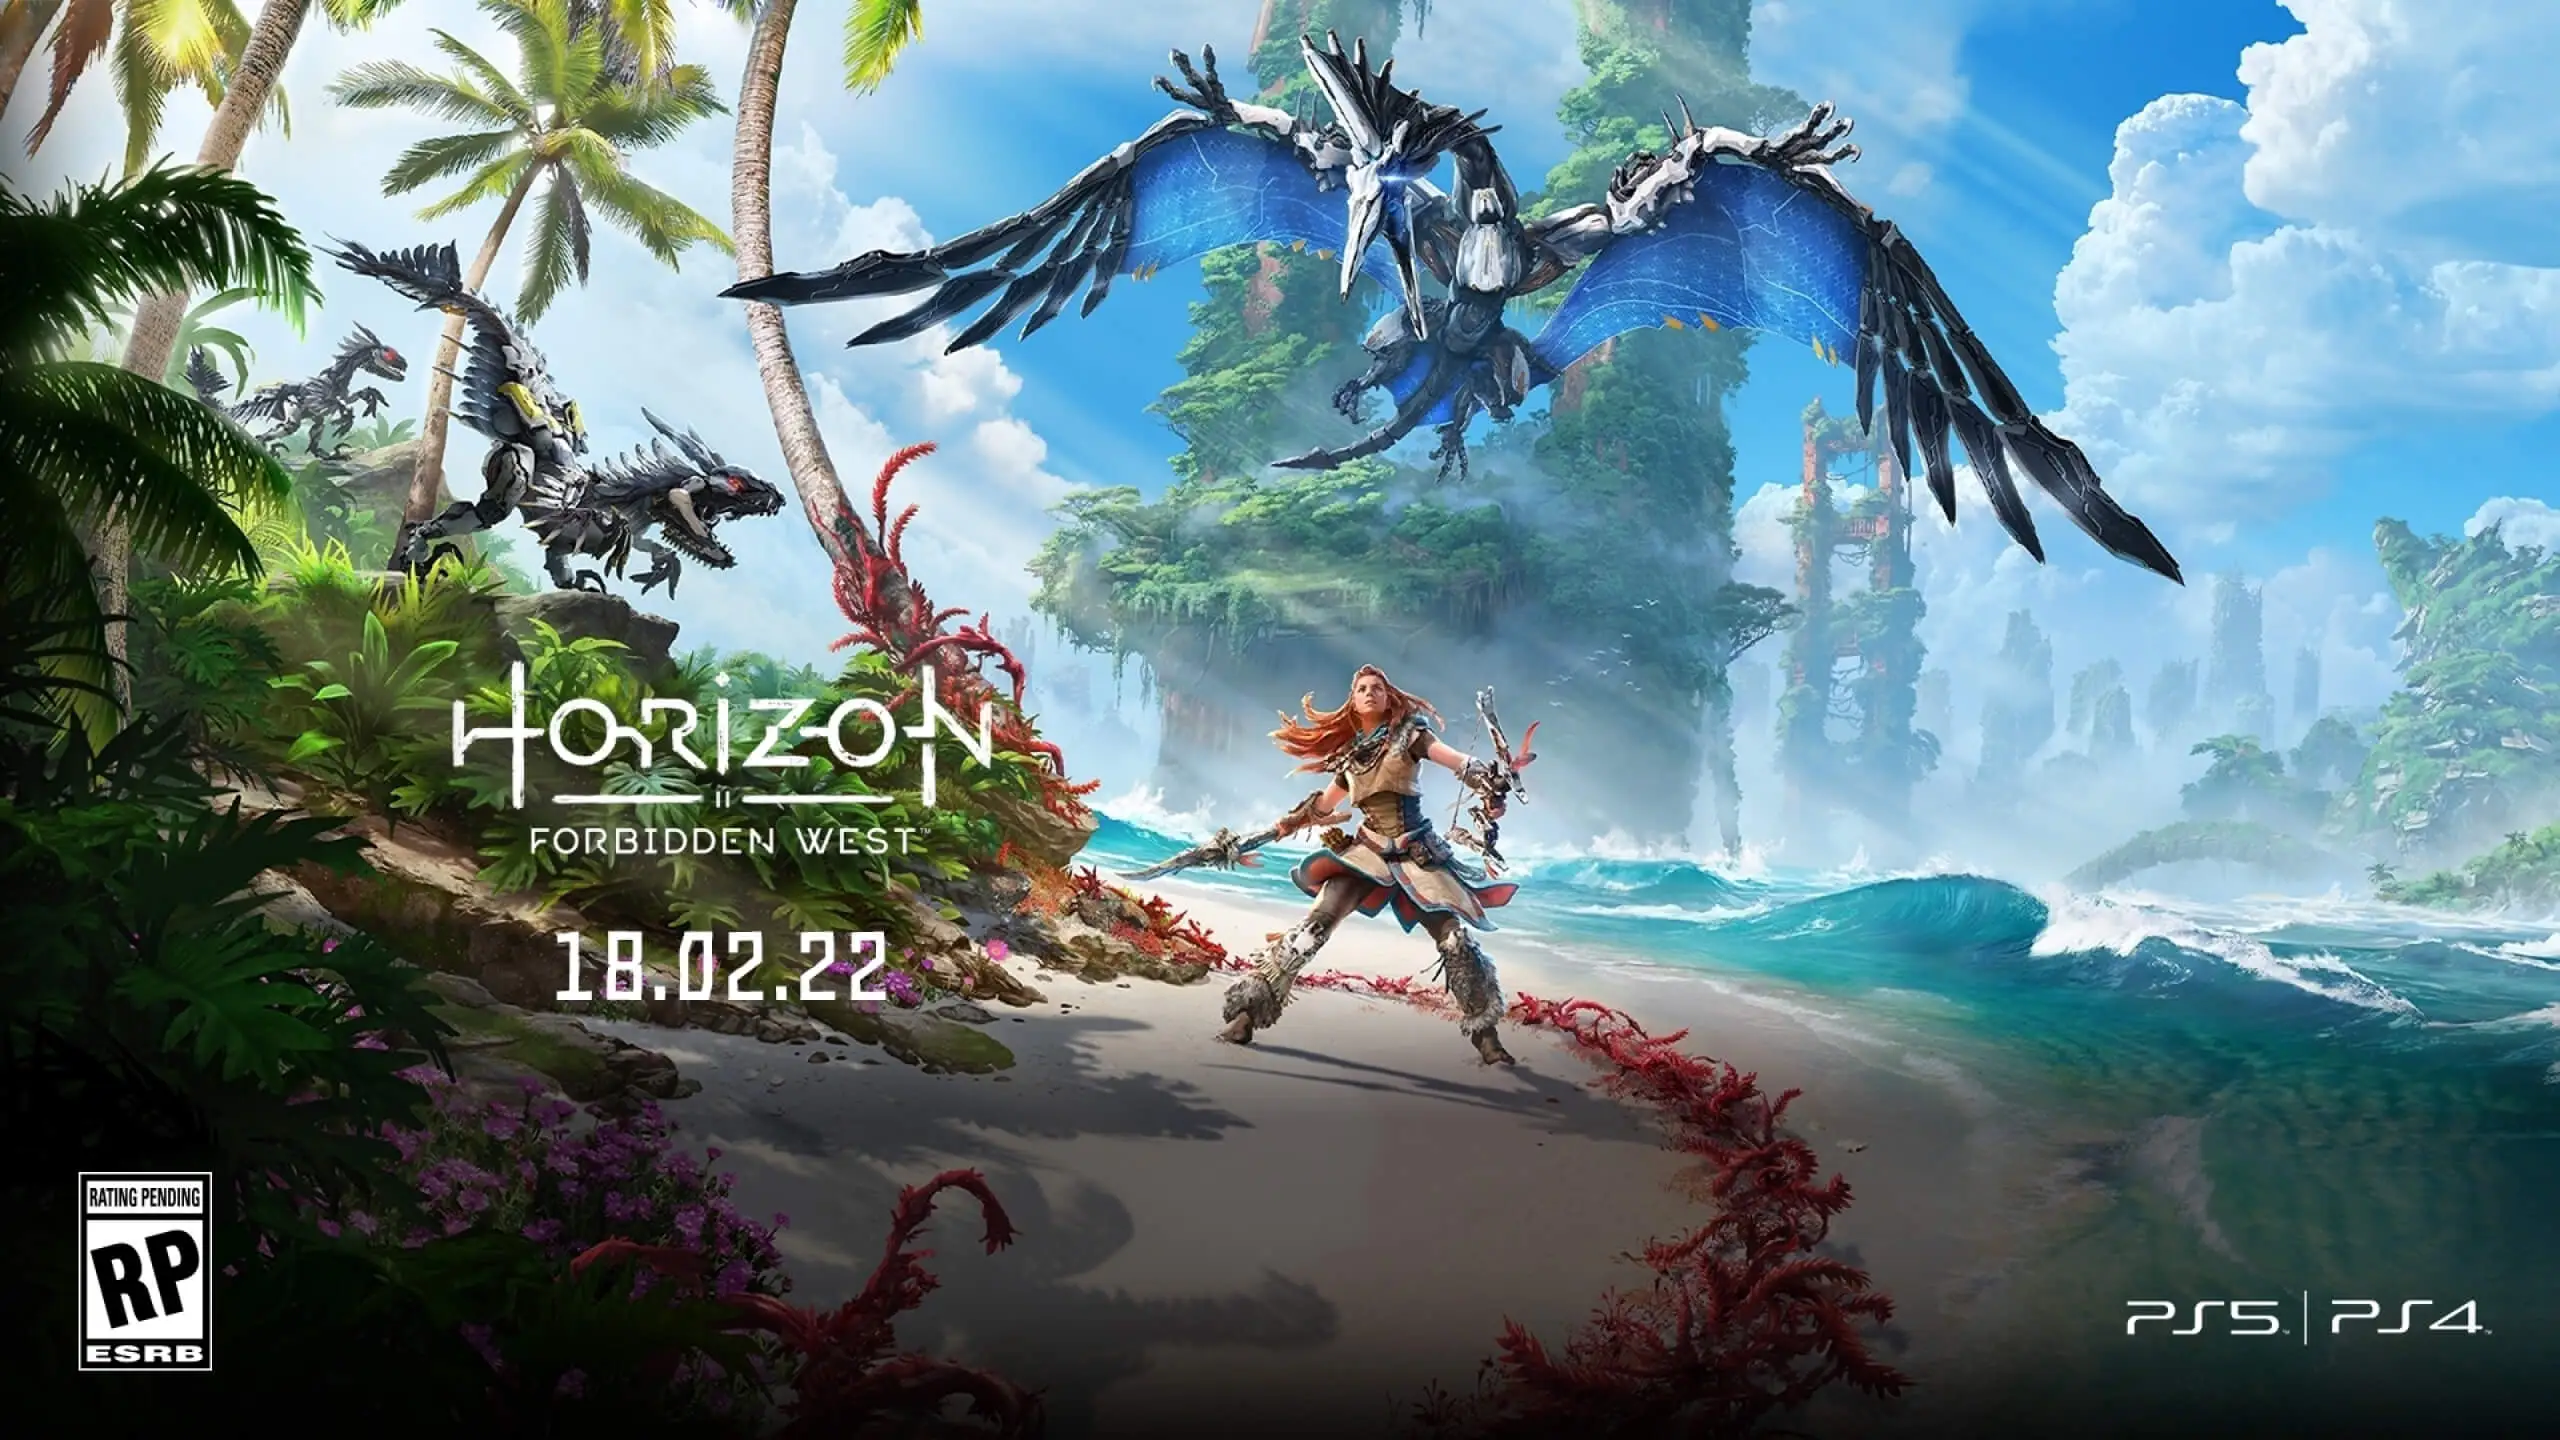 Will Horizon Forbidden West be on PC?